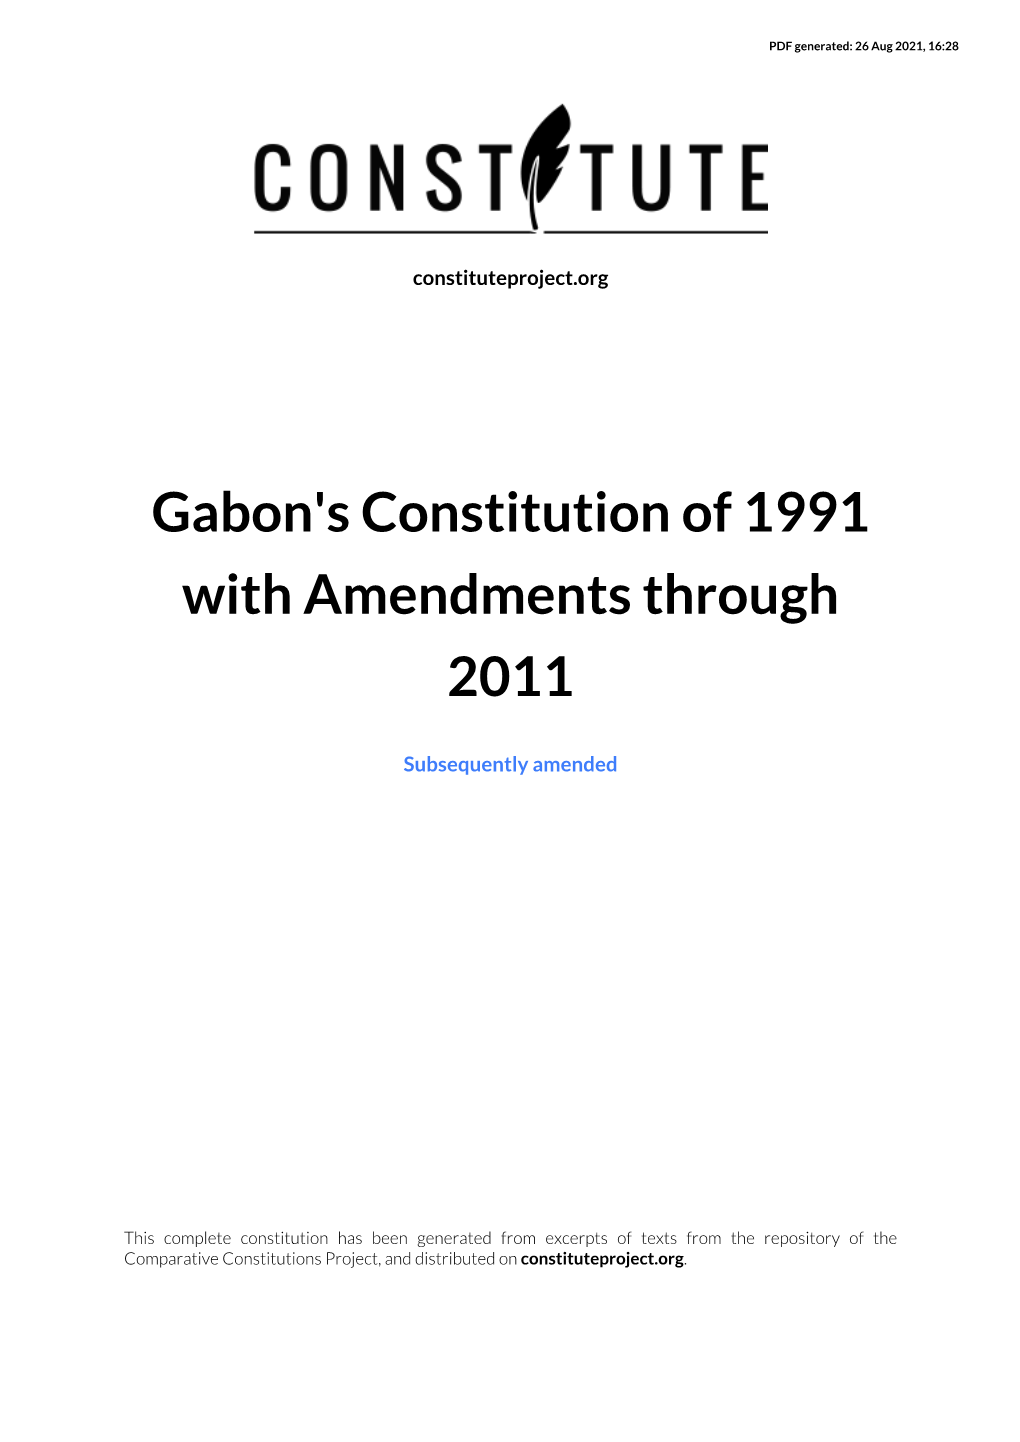 Gabon's Constitution of 1991 with Amendments Through 2011